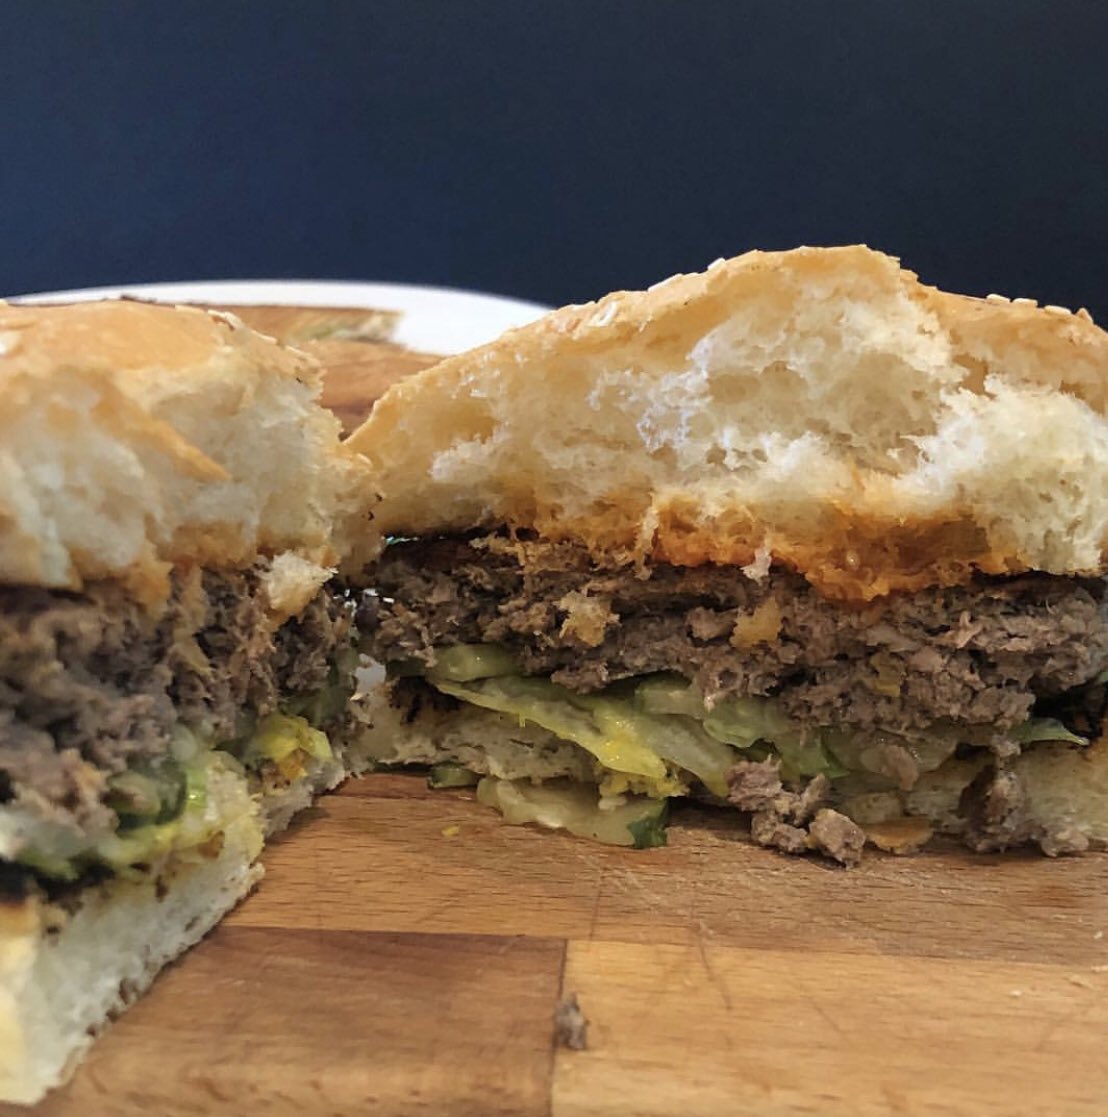 Have you tried @ImpossibleFoods Impossible Burger yet? Perfectly prepared at Heirloom Craft Kitchen.  Gotta try it out, those #plantbaseddiet people are onto something!
#plantbasedchef #veganfood